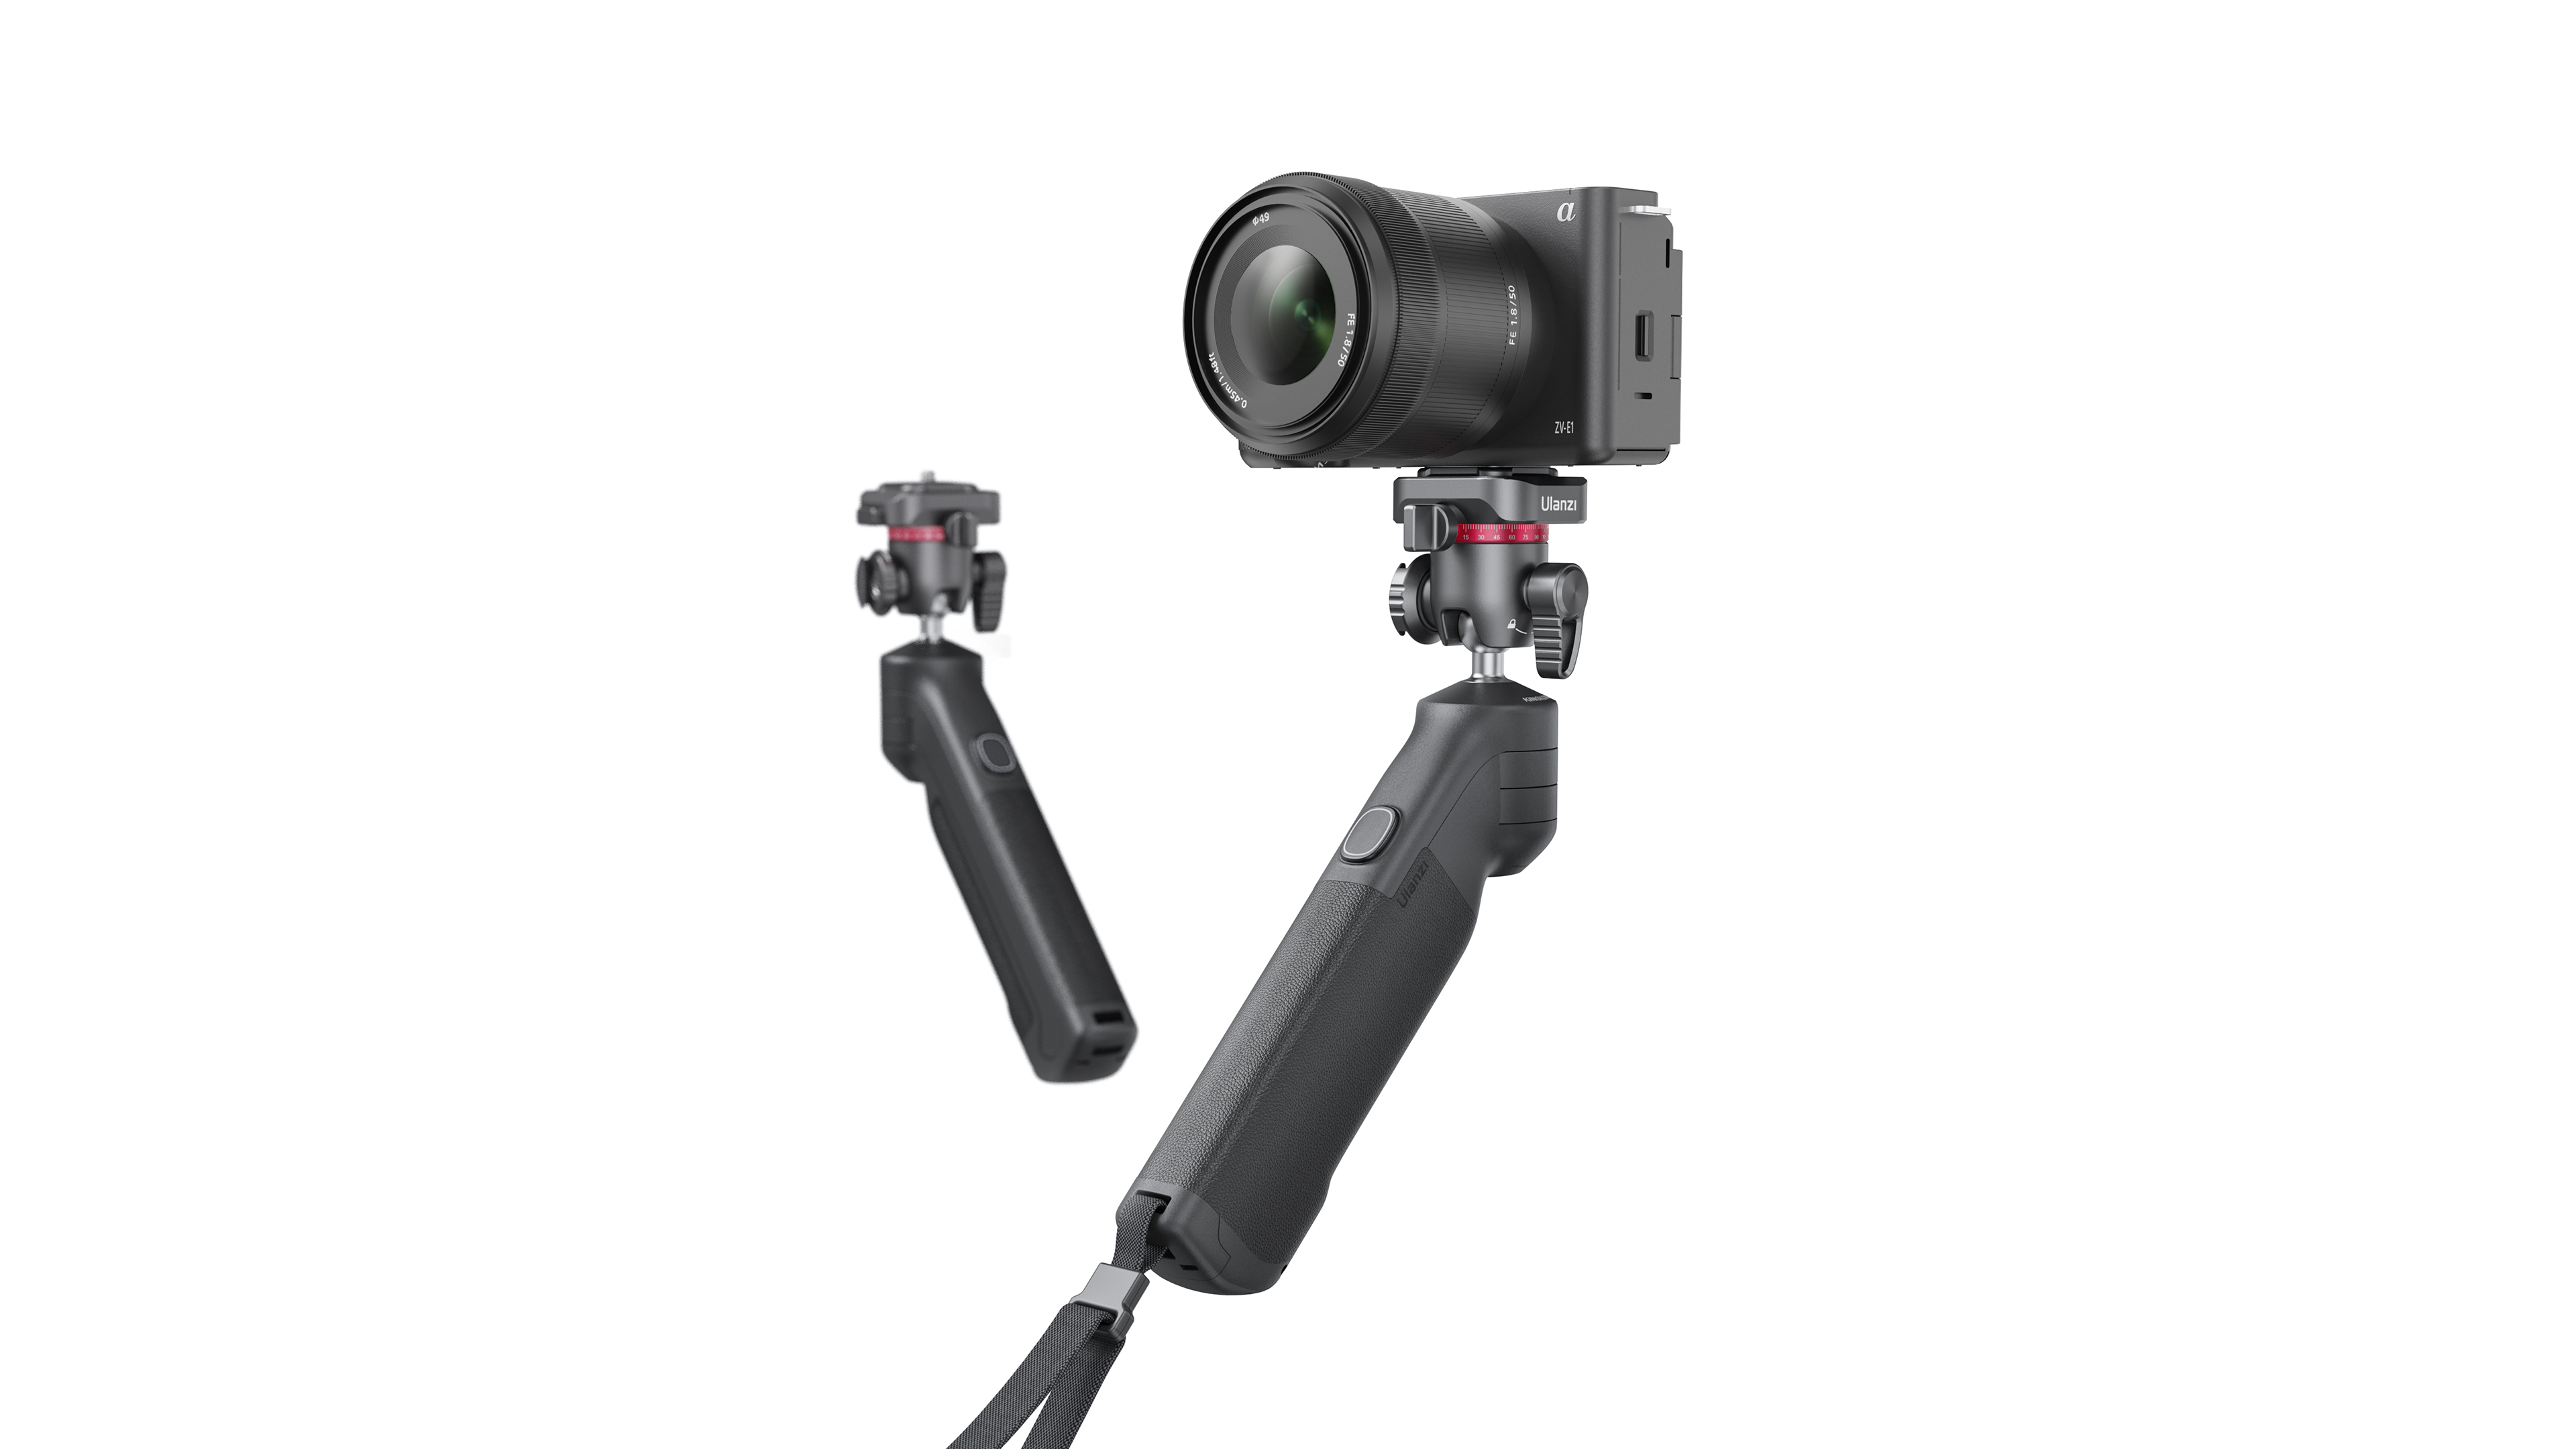 One-click Openning Tripod